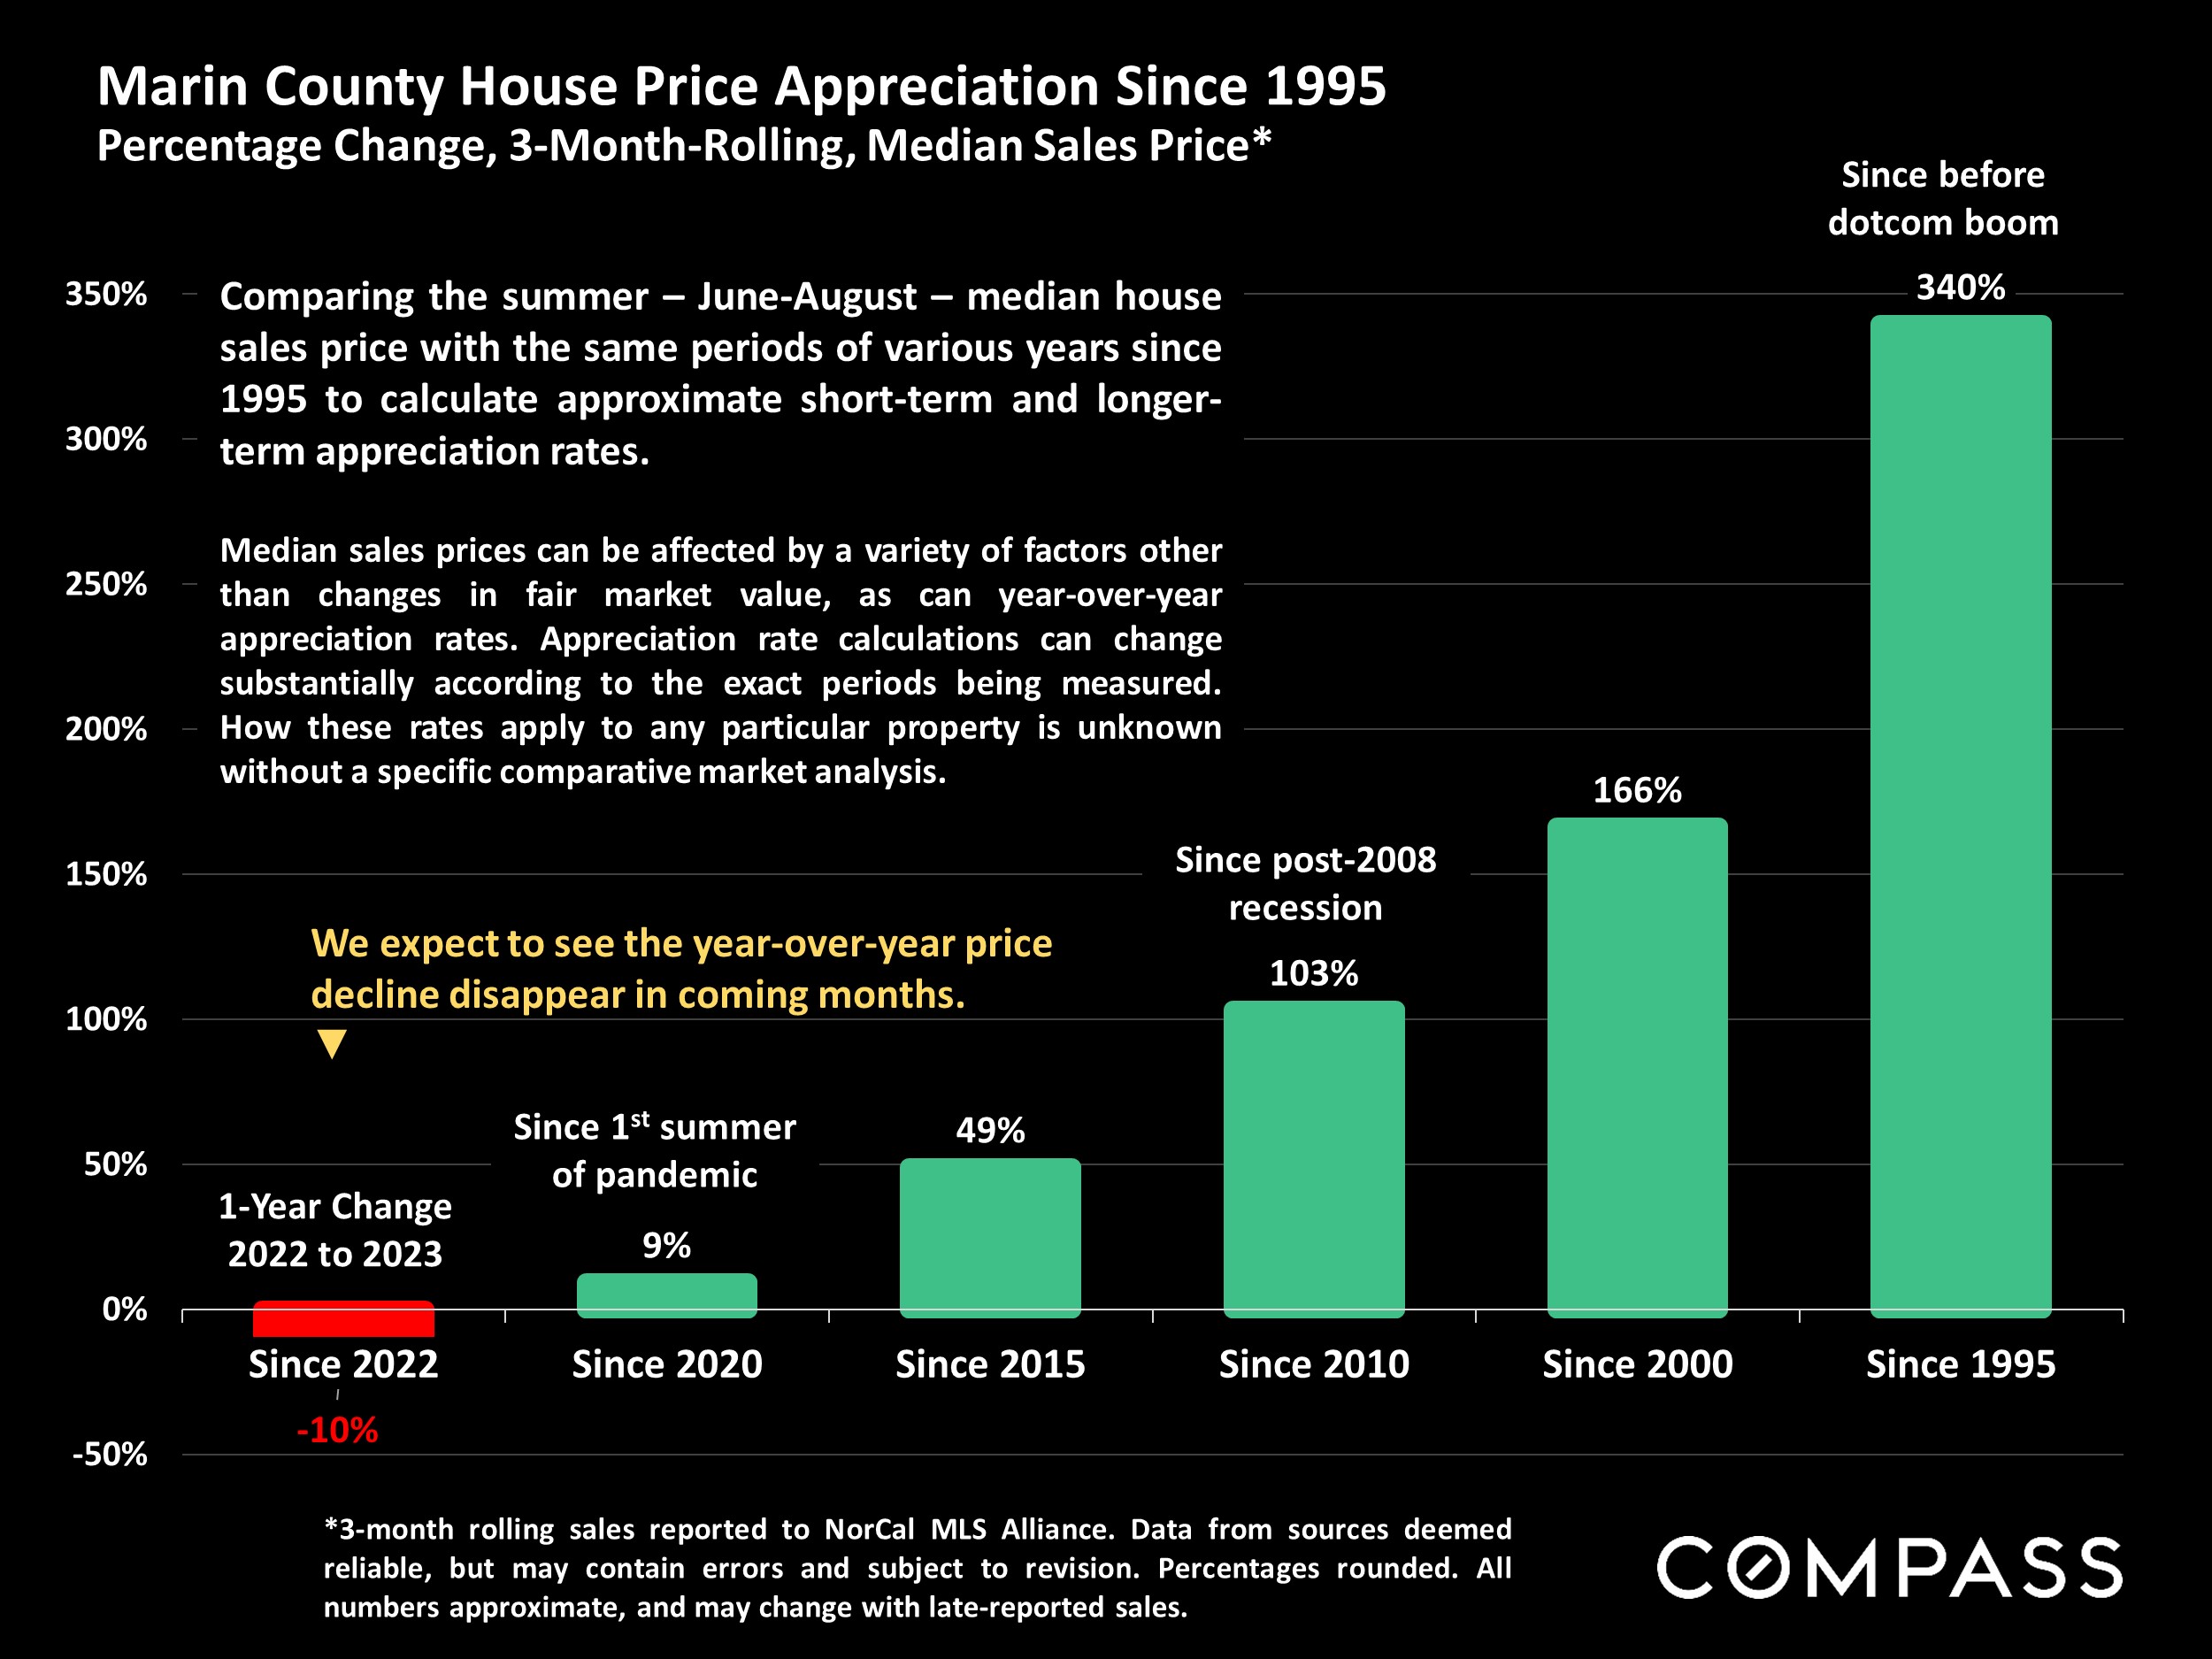 Marin County House Price Appreciation Since 1995 Percentage Change, 3-Month-Rolling, Median Sales Price*